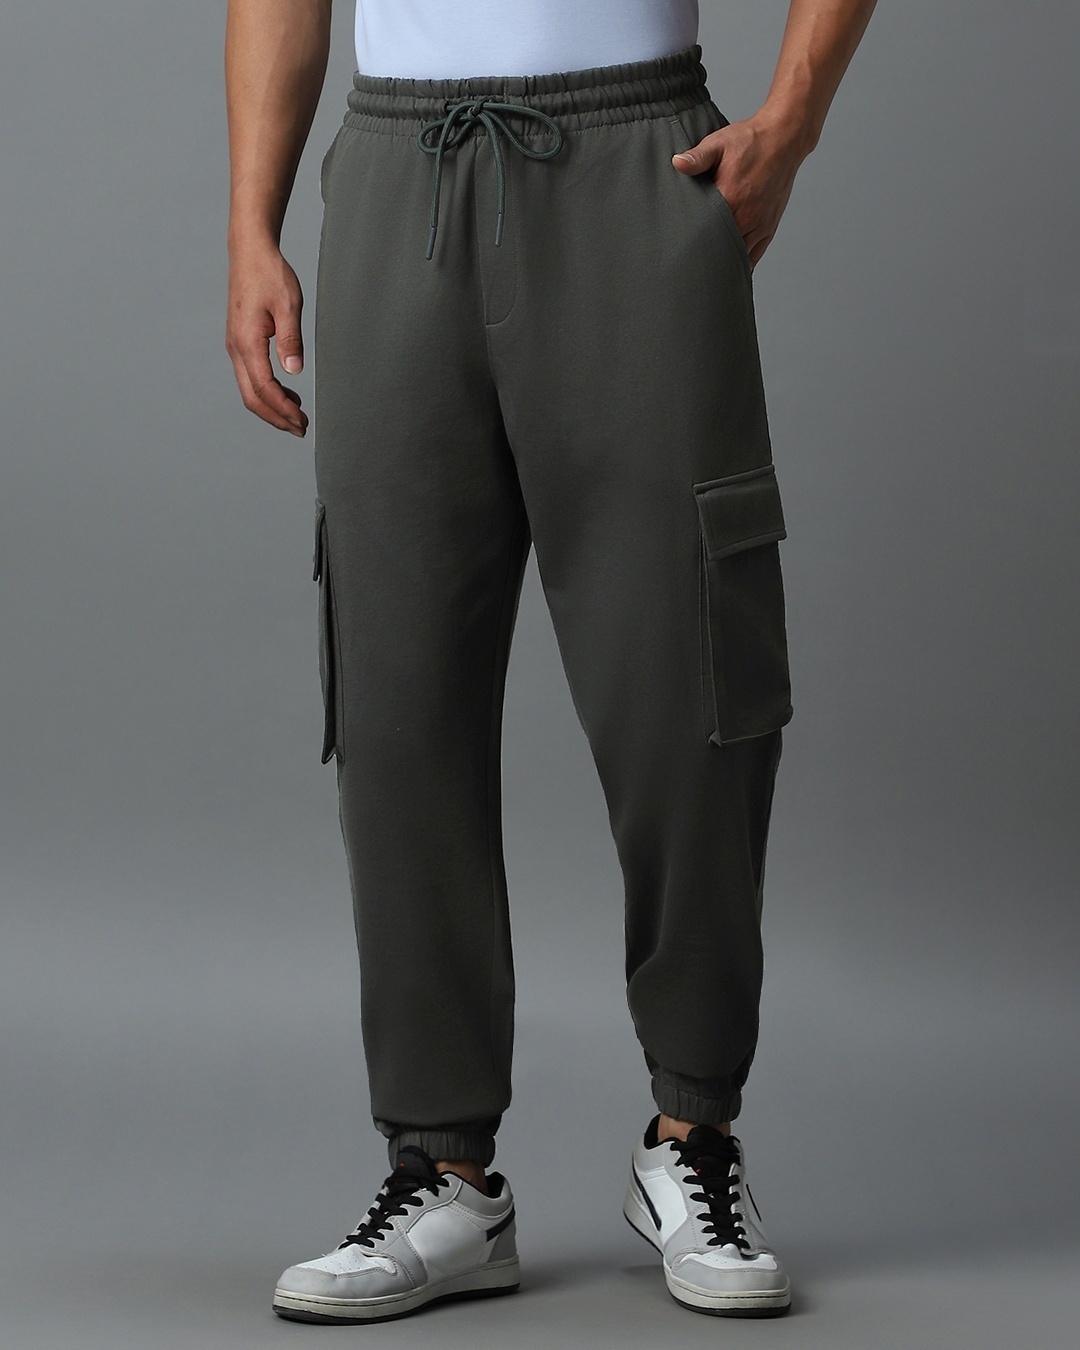 Men's Polyester Stylish Slim fit Solid Cargo Track pant